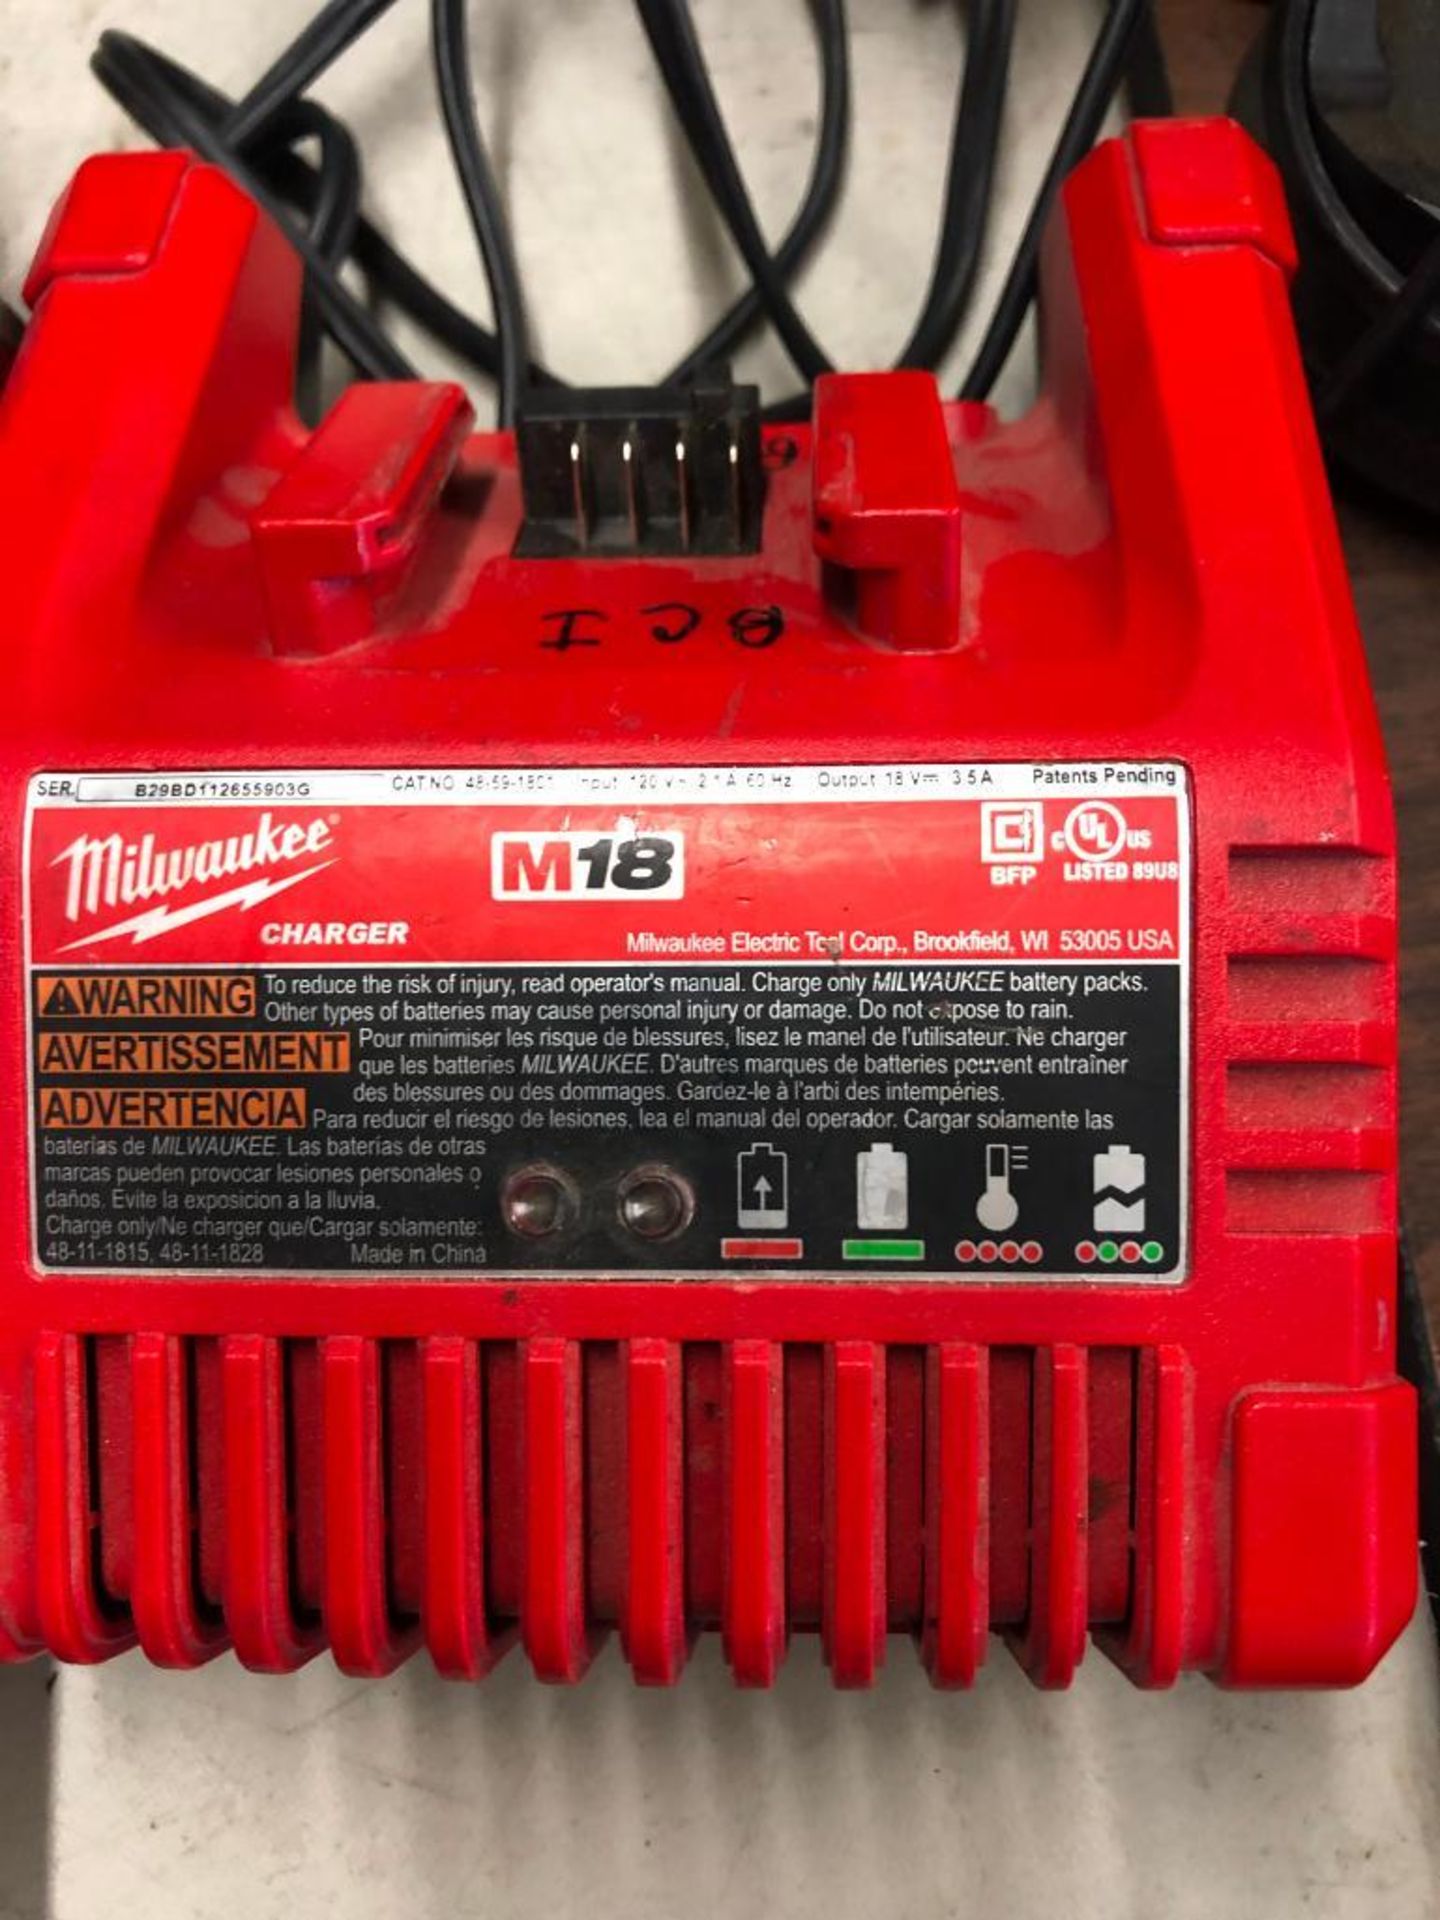 MILWAUKEE CORDLESS 4-1/2'' CUT-OFF GRINDER W/ CHARGER - Image 2 of 3